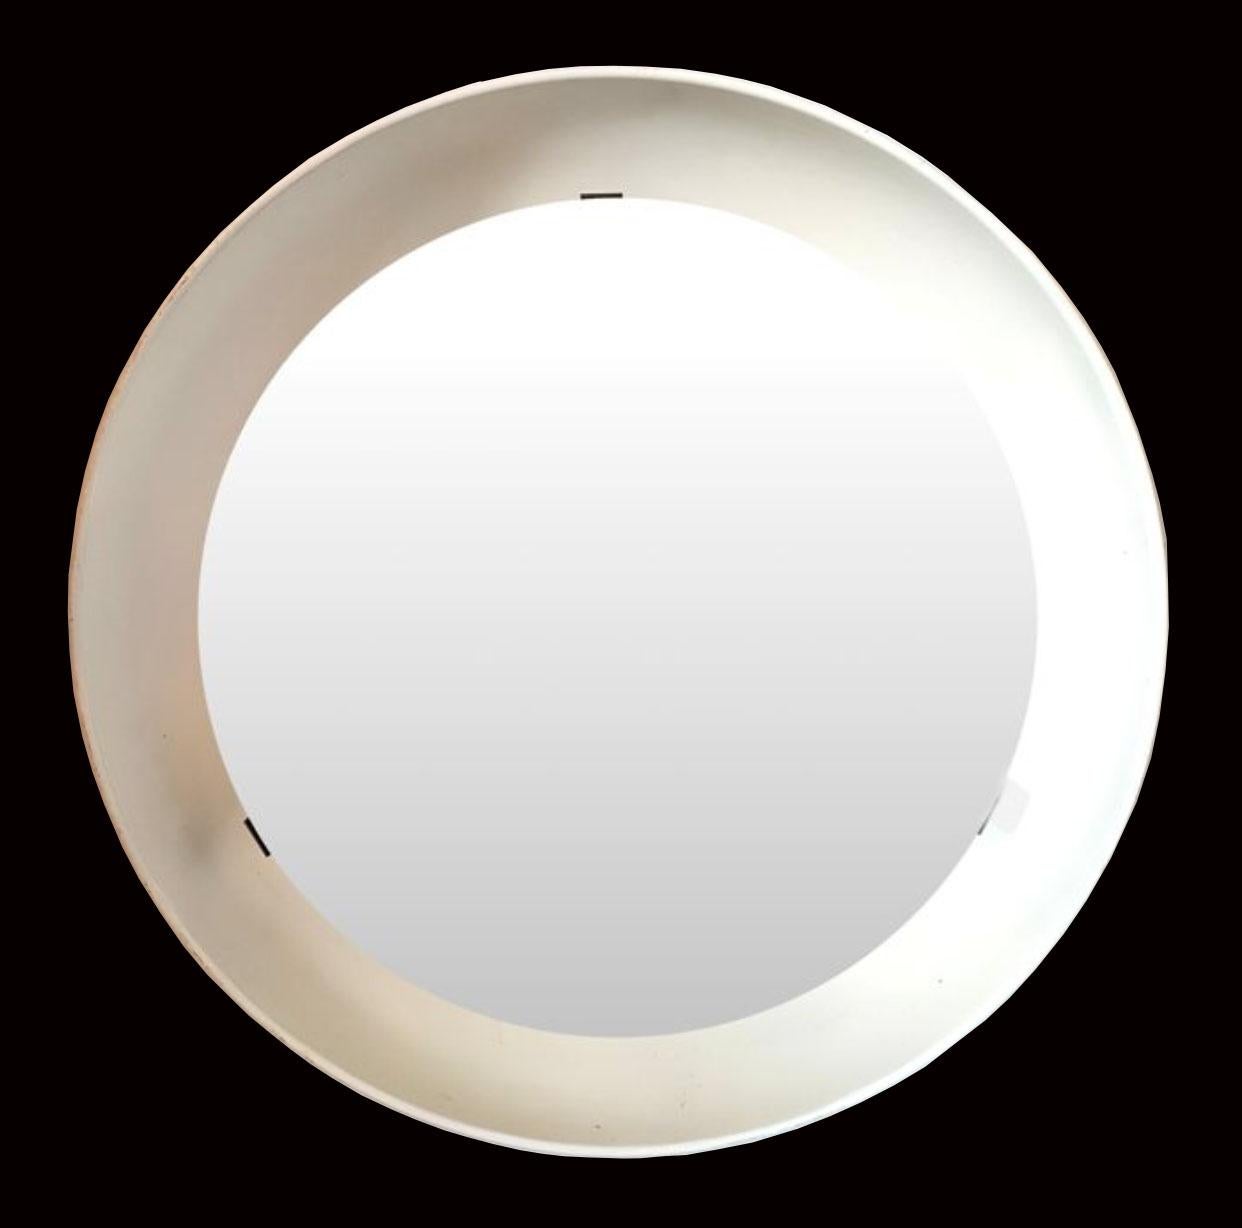 A very nice origibnal illuminated wall mirror by Danish master lighting designer, Poul Henningsen for Louis Poulsen, a great addition to any mid-century home, perfect for checking the make-up on the way out of the door!